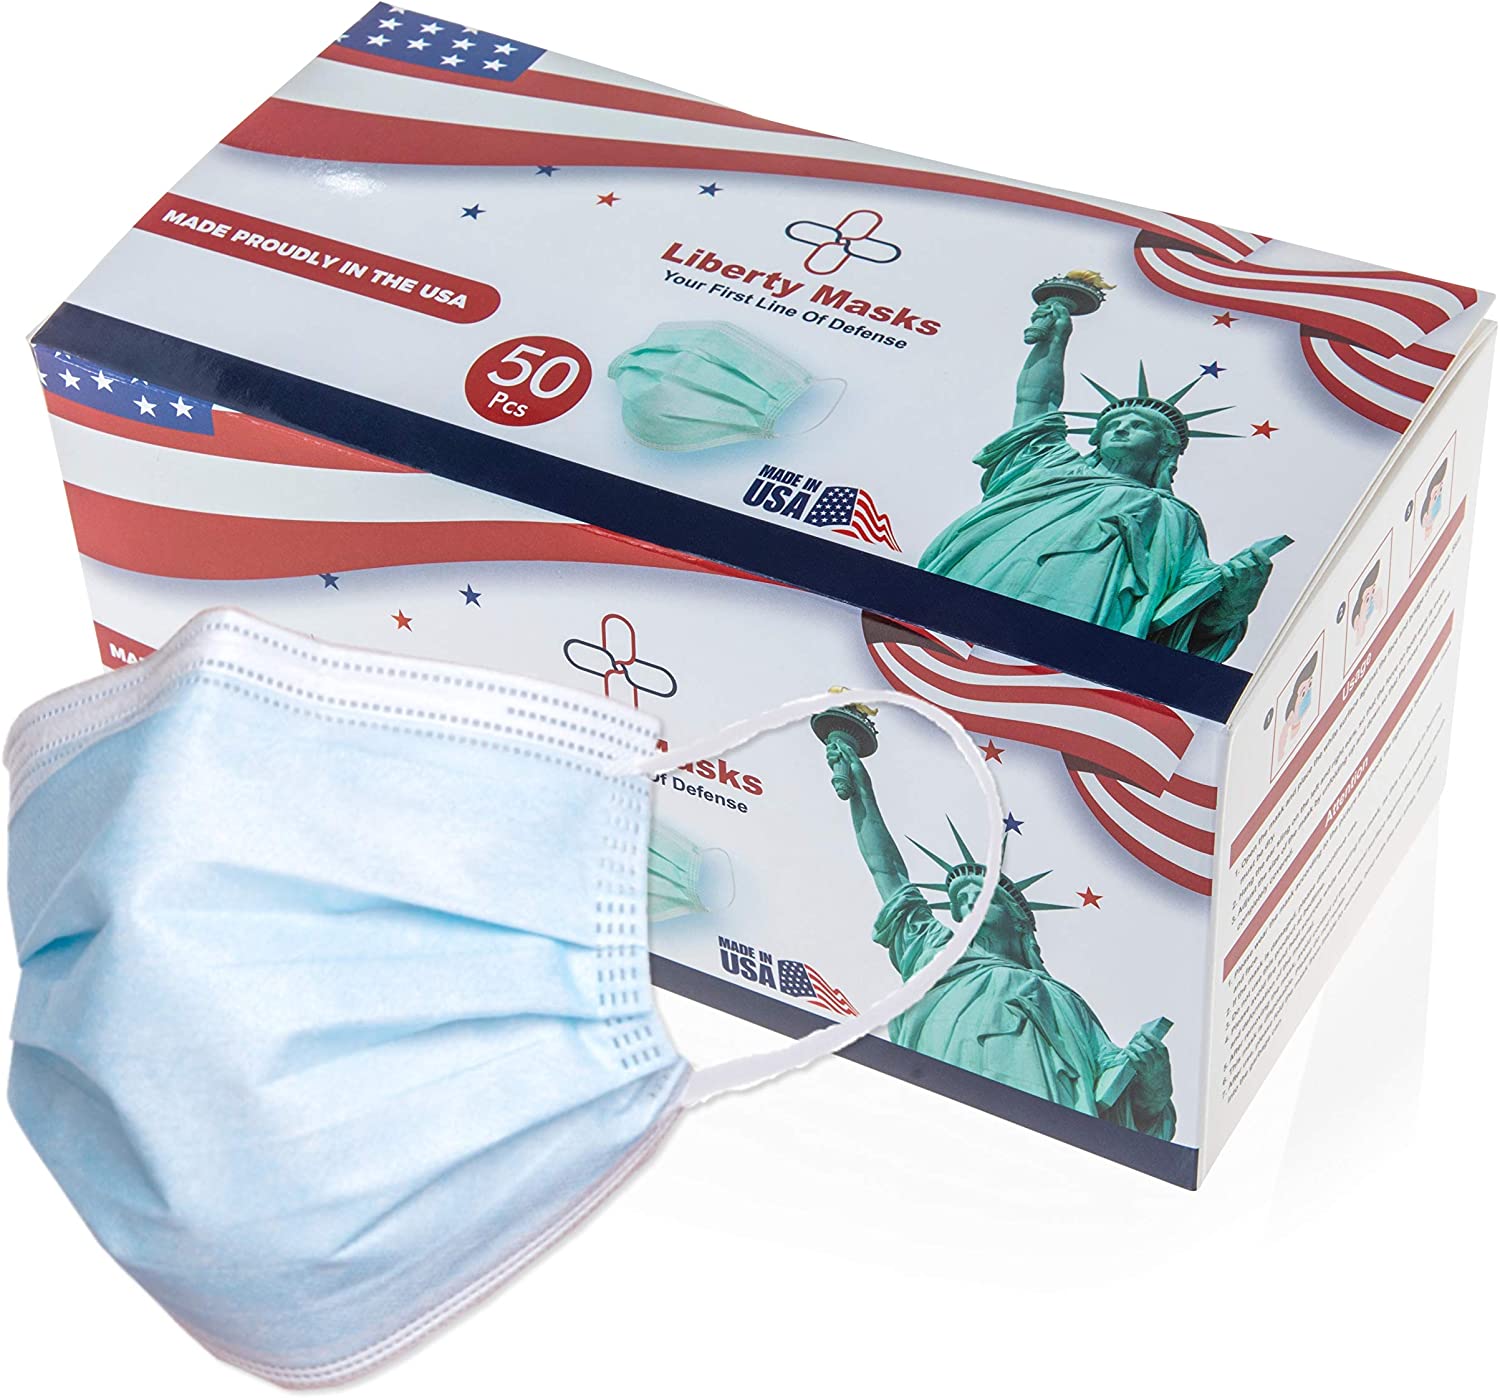 [1000-Pack] BLUE Liberty Masks | Made in USA | 3 Ply Disposable Face Masks | Adjustable Nose Wire | Breathable Face Covering | Lightweight | Soft Elastic Ear Loops